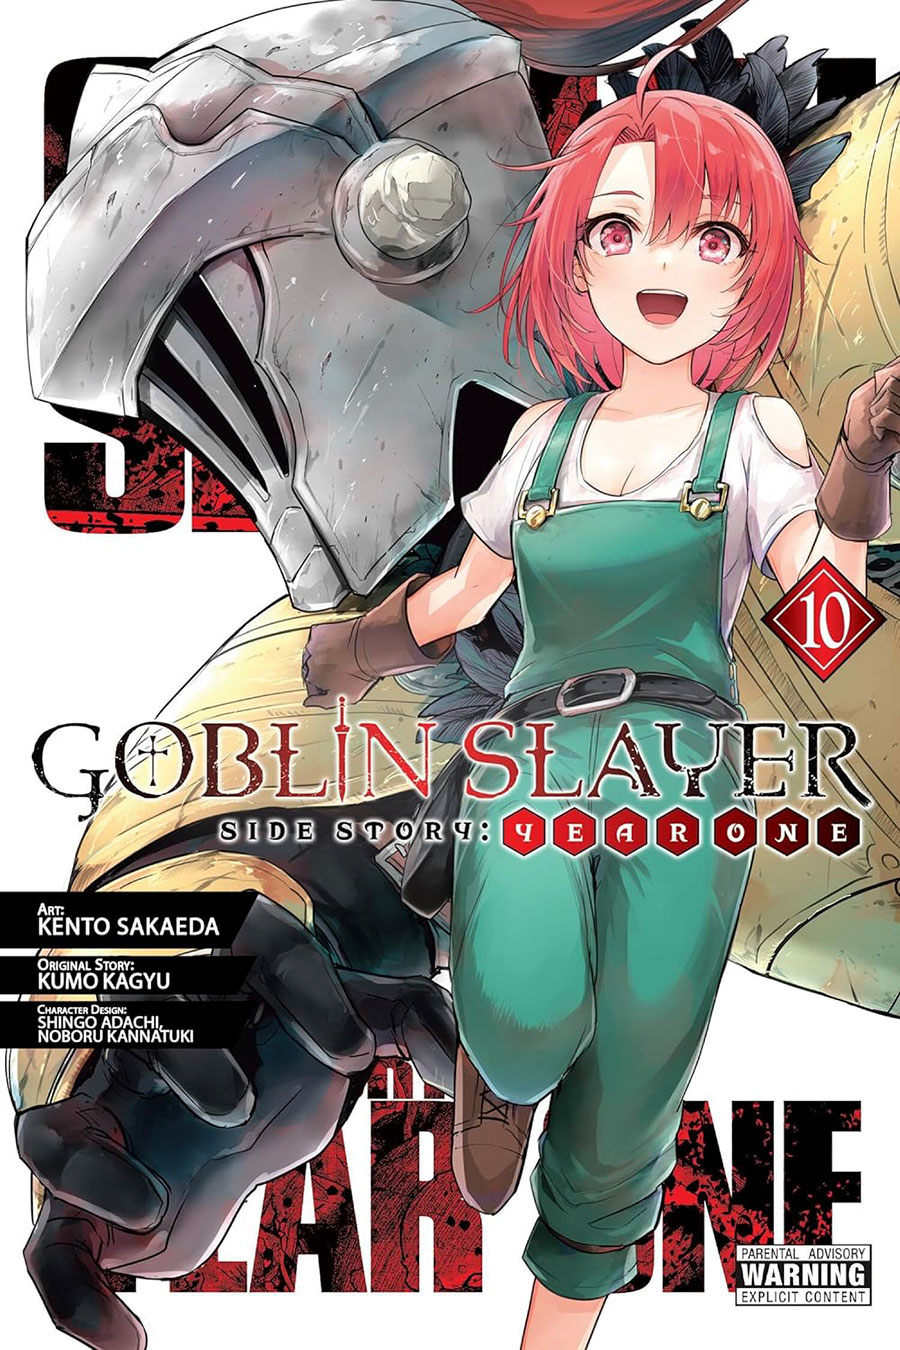 Goblin Slayer Side Story Year One Vol 10 GN